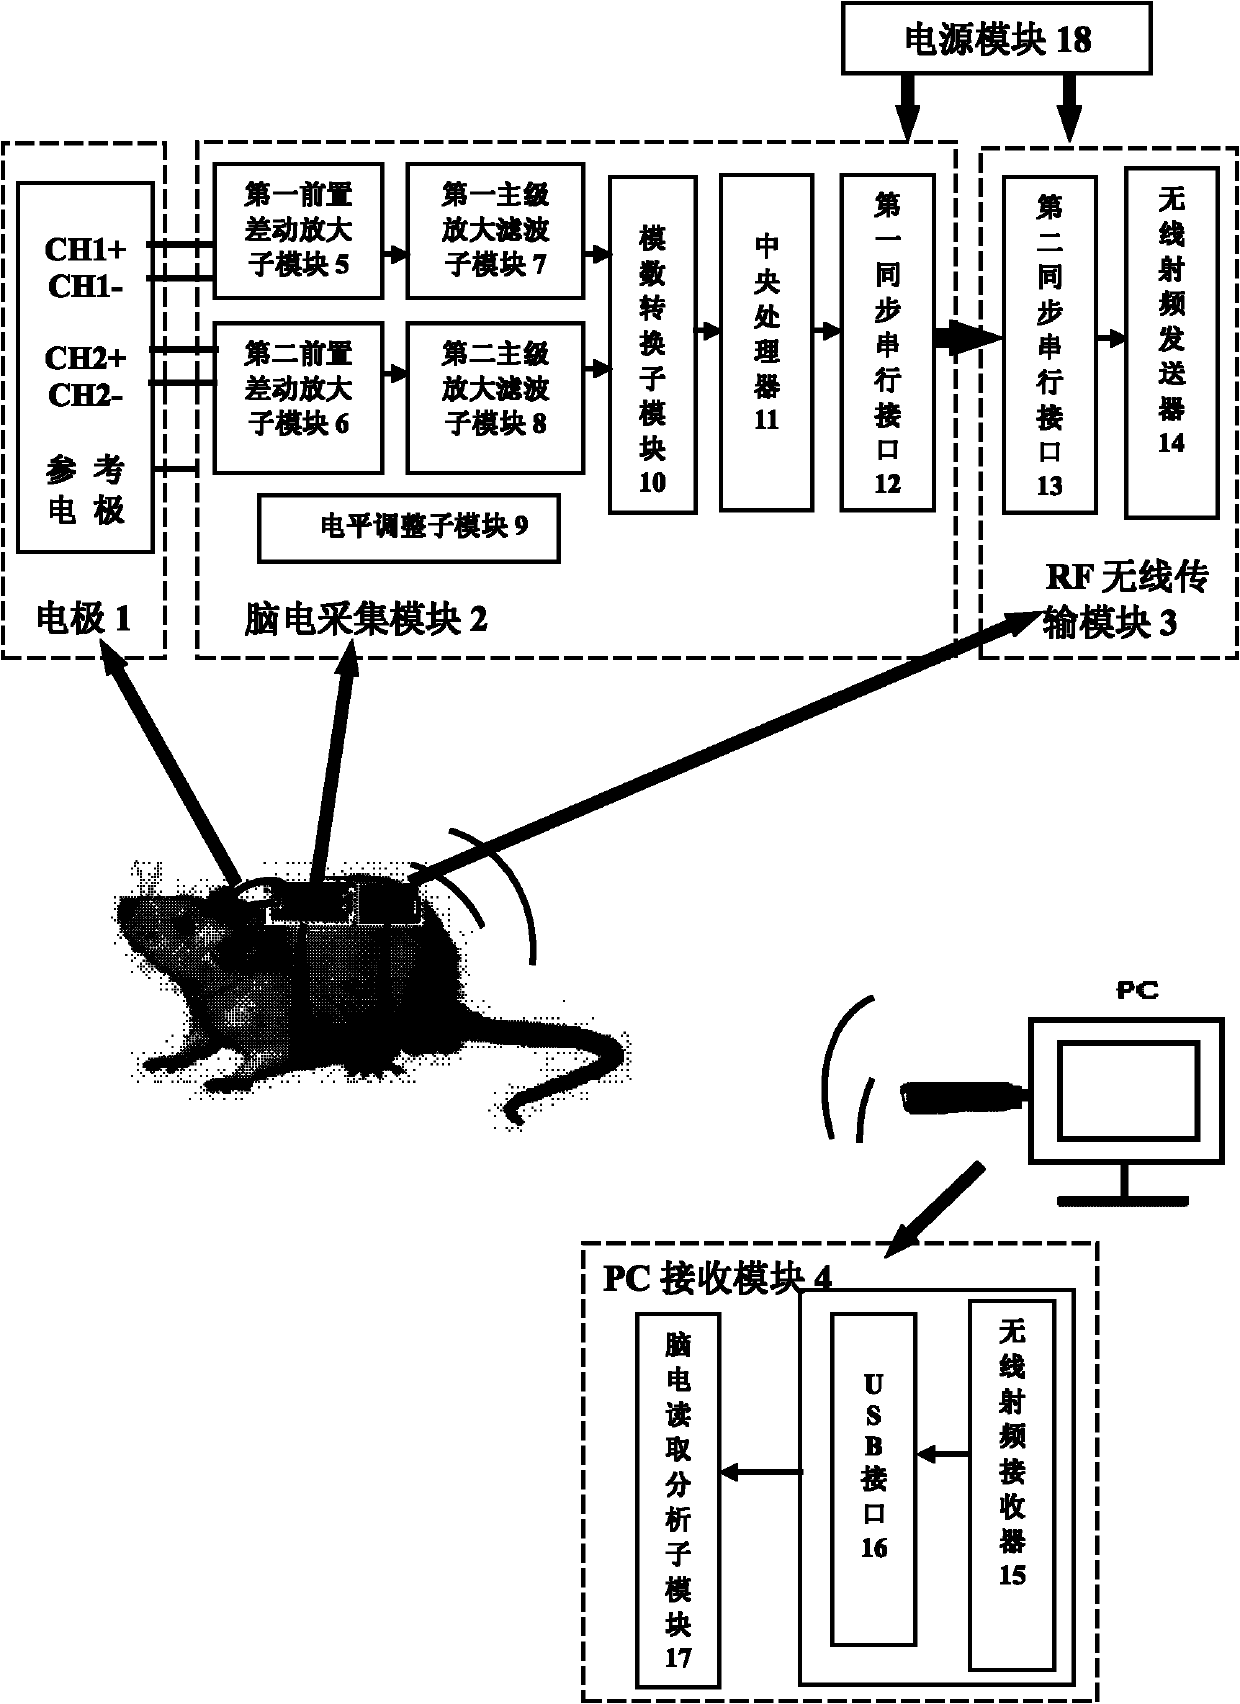 Wireless mobile real-time acquisition device for electroencephalograph of small animals